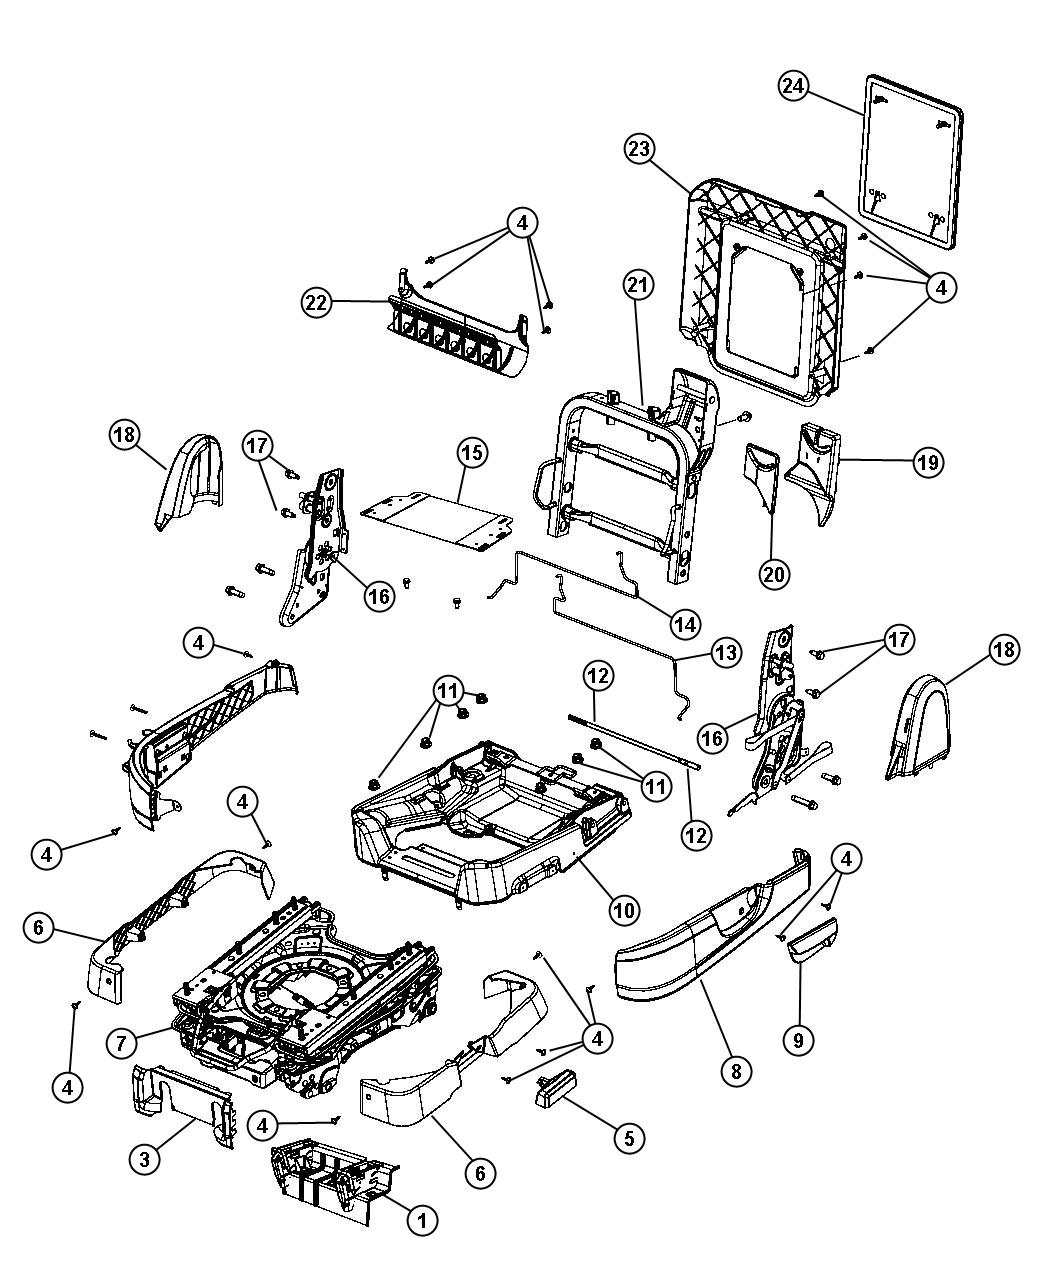 Diagram Second Row - Adjusters, Recliners, Shields and Risers - Swivel. for your Dodge Grand Caravan  